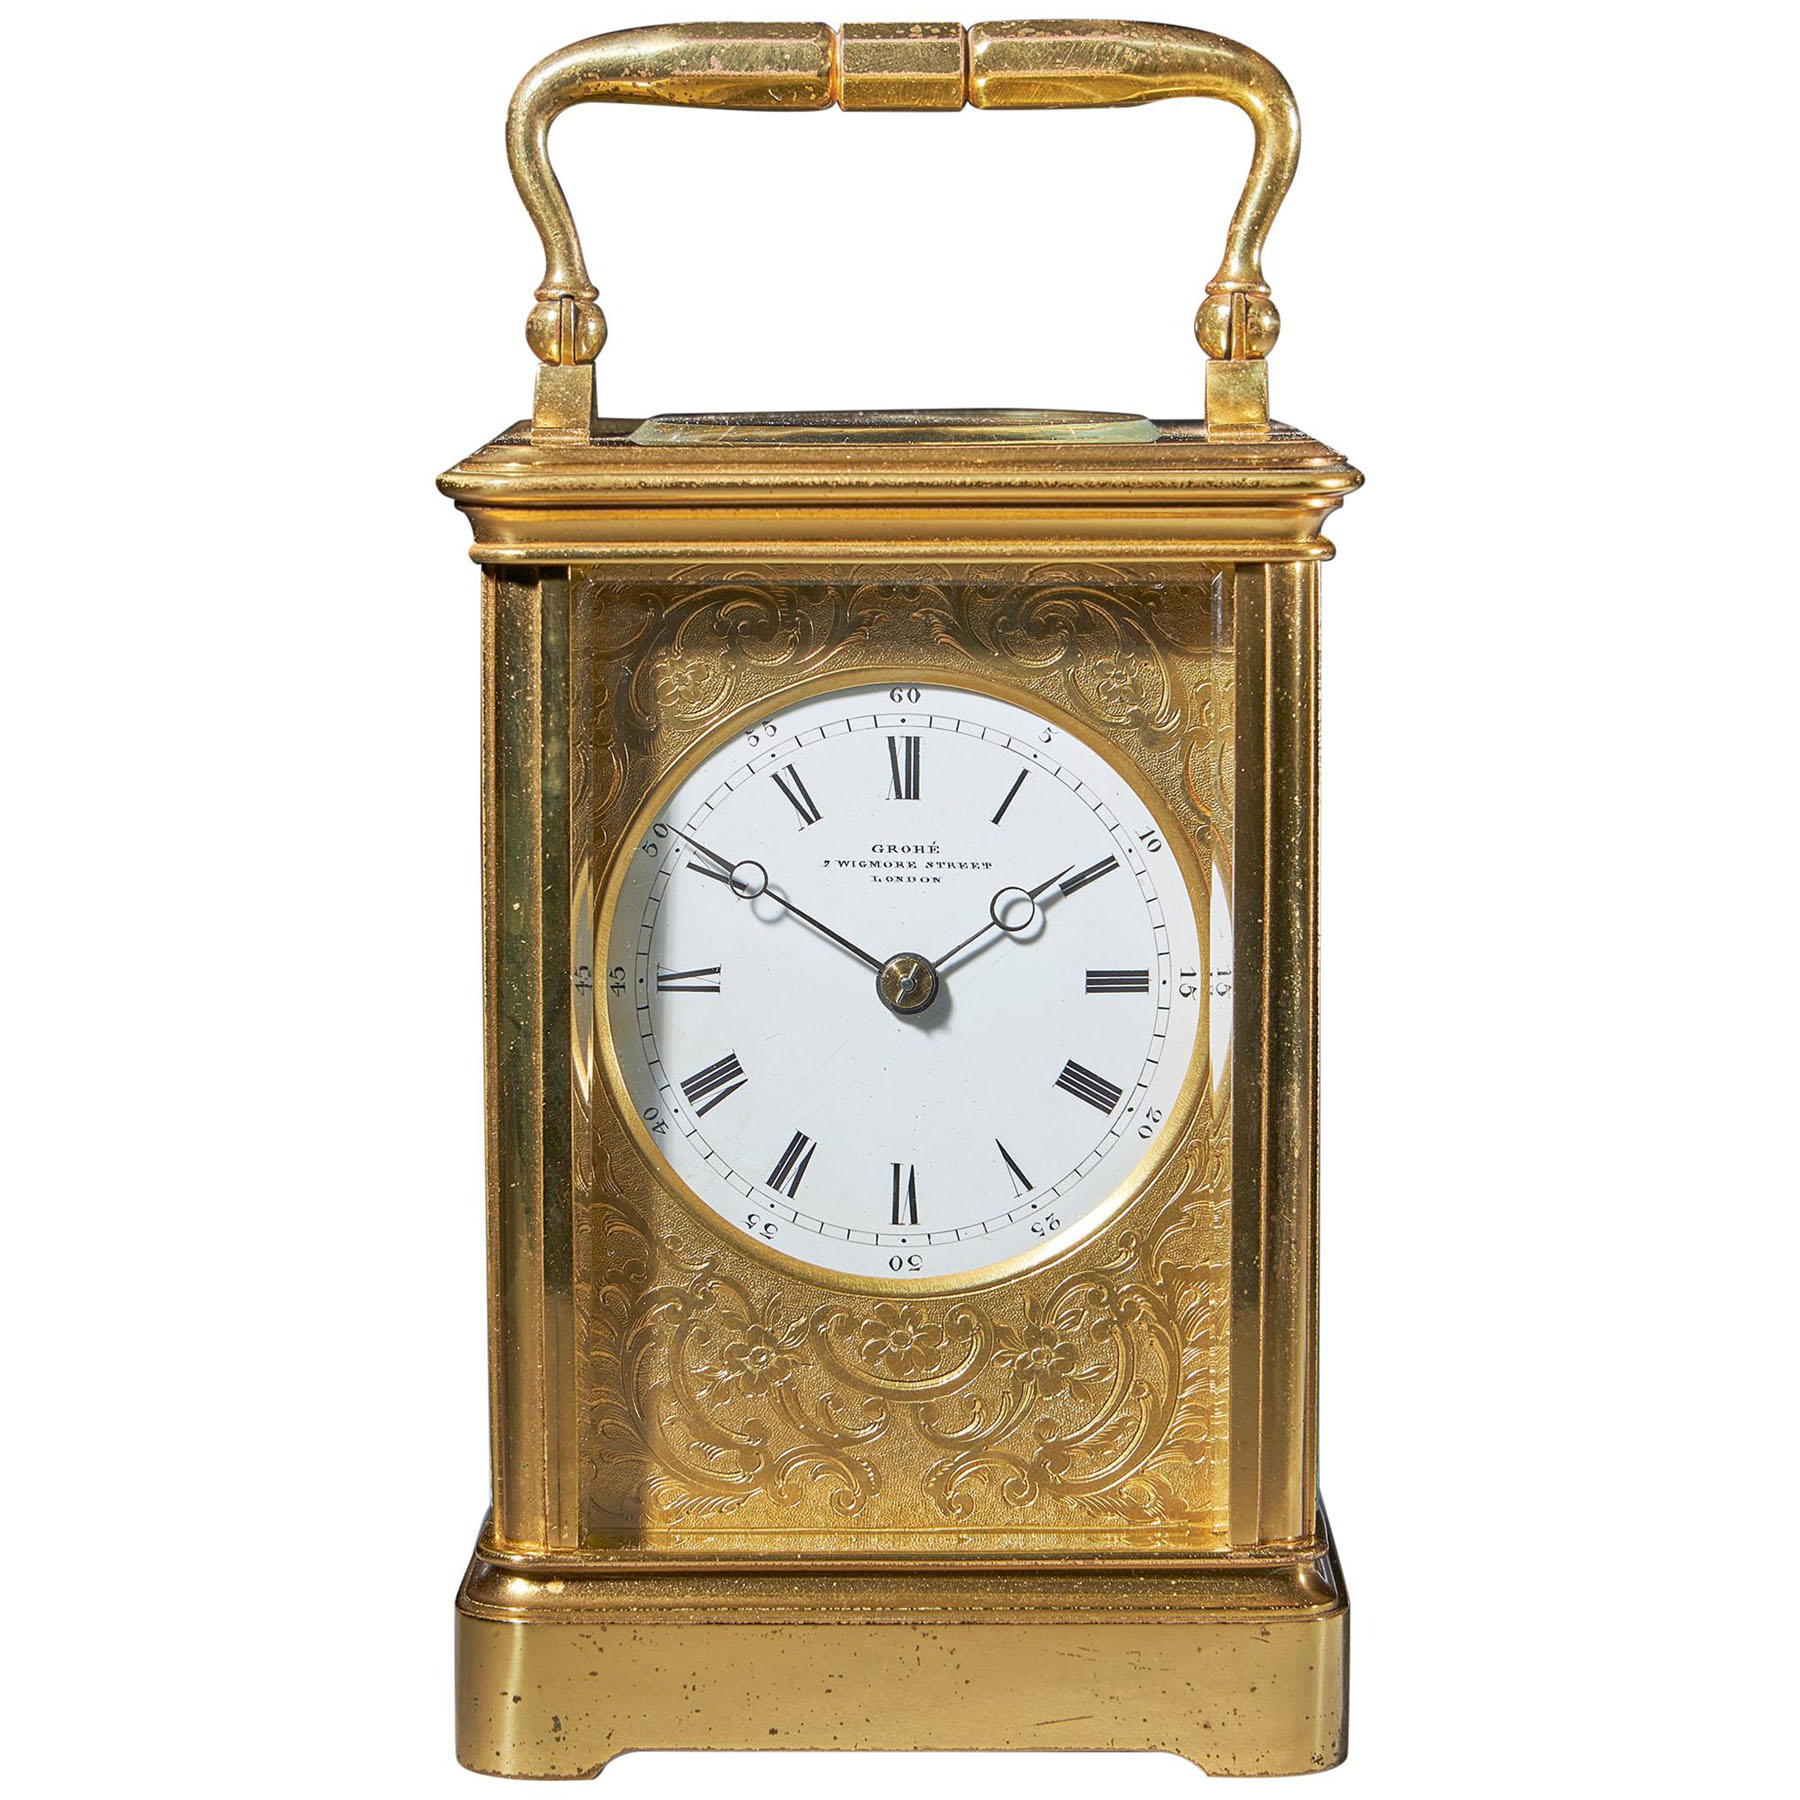 Striking 19th Century Carriage Clock with a Gilt-Brass Corniche Case by Grohé 1